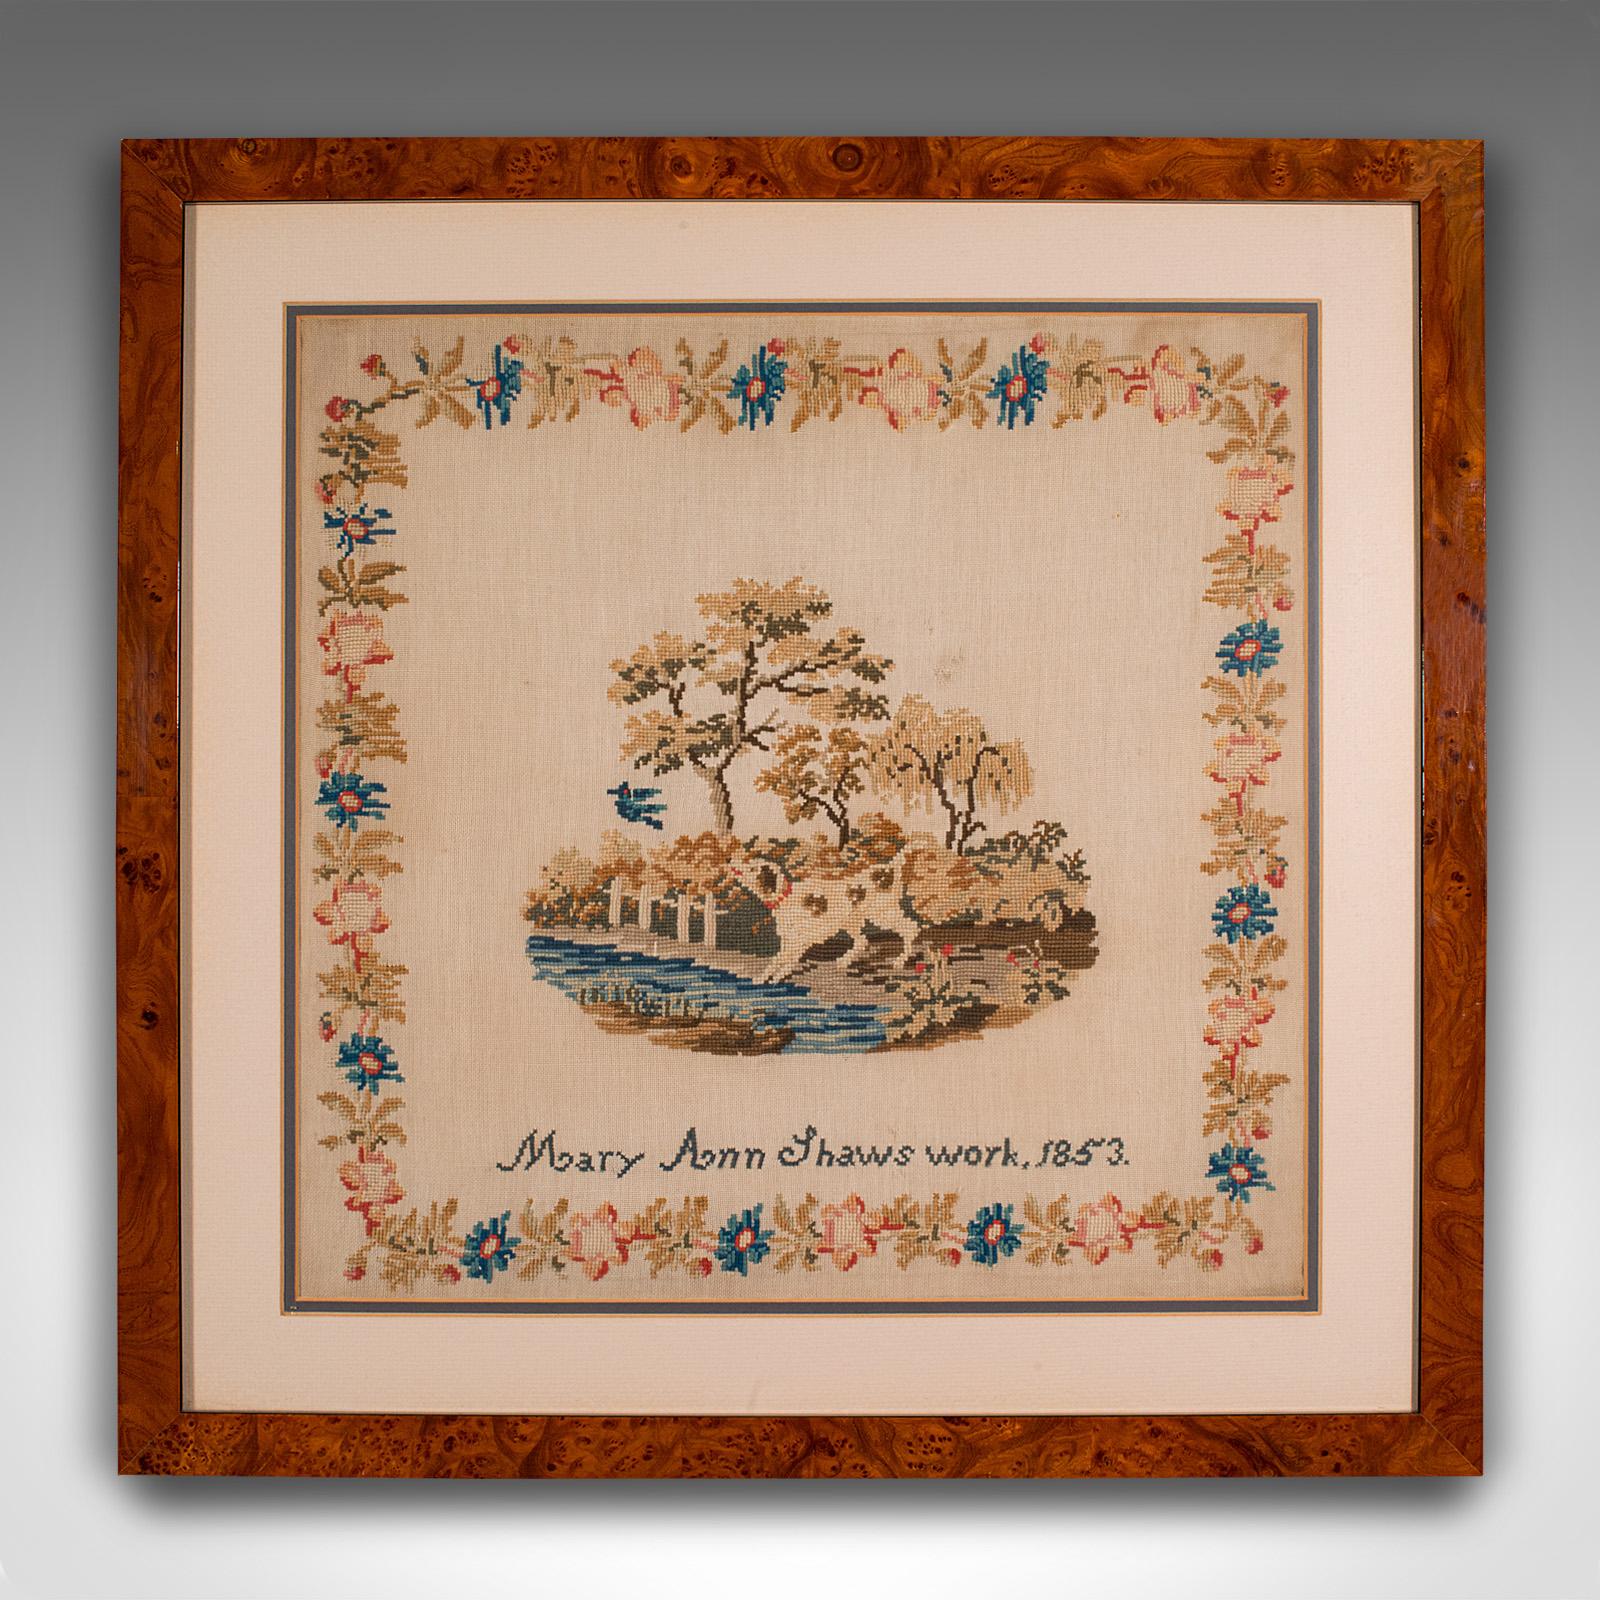 This is an antique framed sampler. An English, needlepoint tapestry panel, dated to the Victorian period and later, circa 1850.

Delightful early Victorian period sampler
Displaying a desirable aged patina and in good order
Charming needlepoint